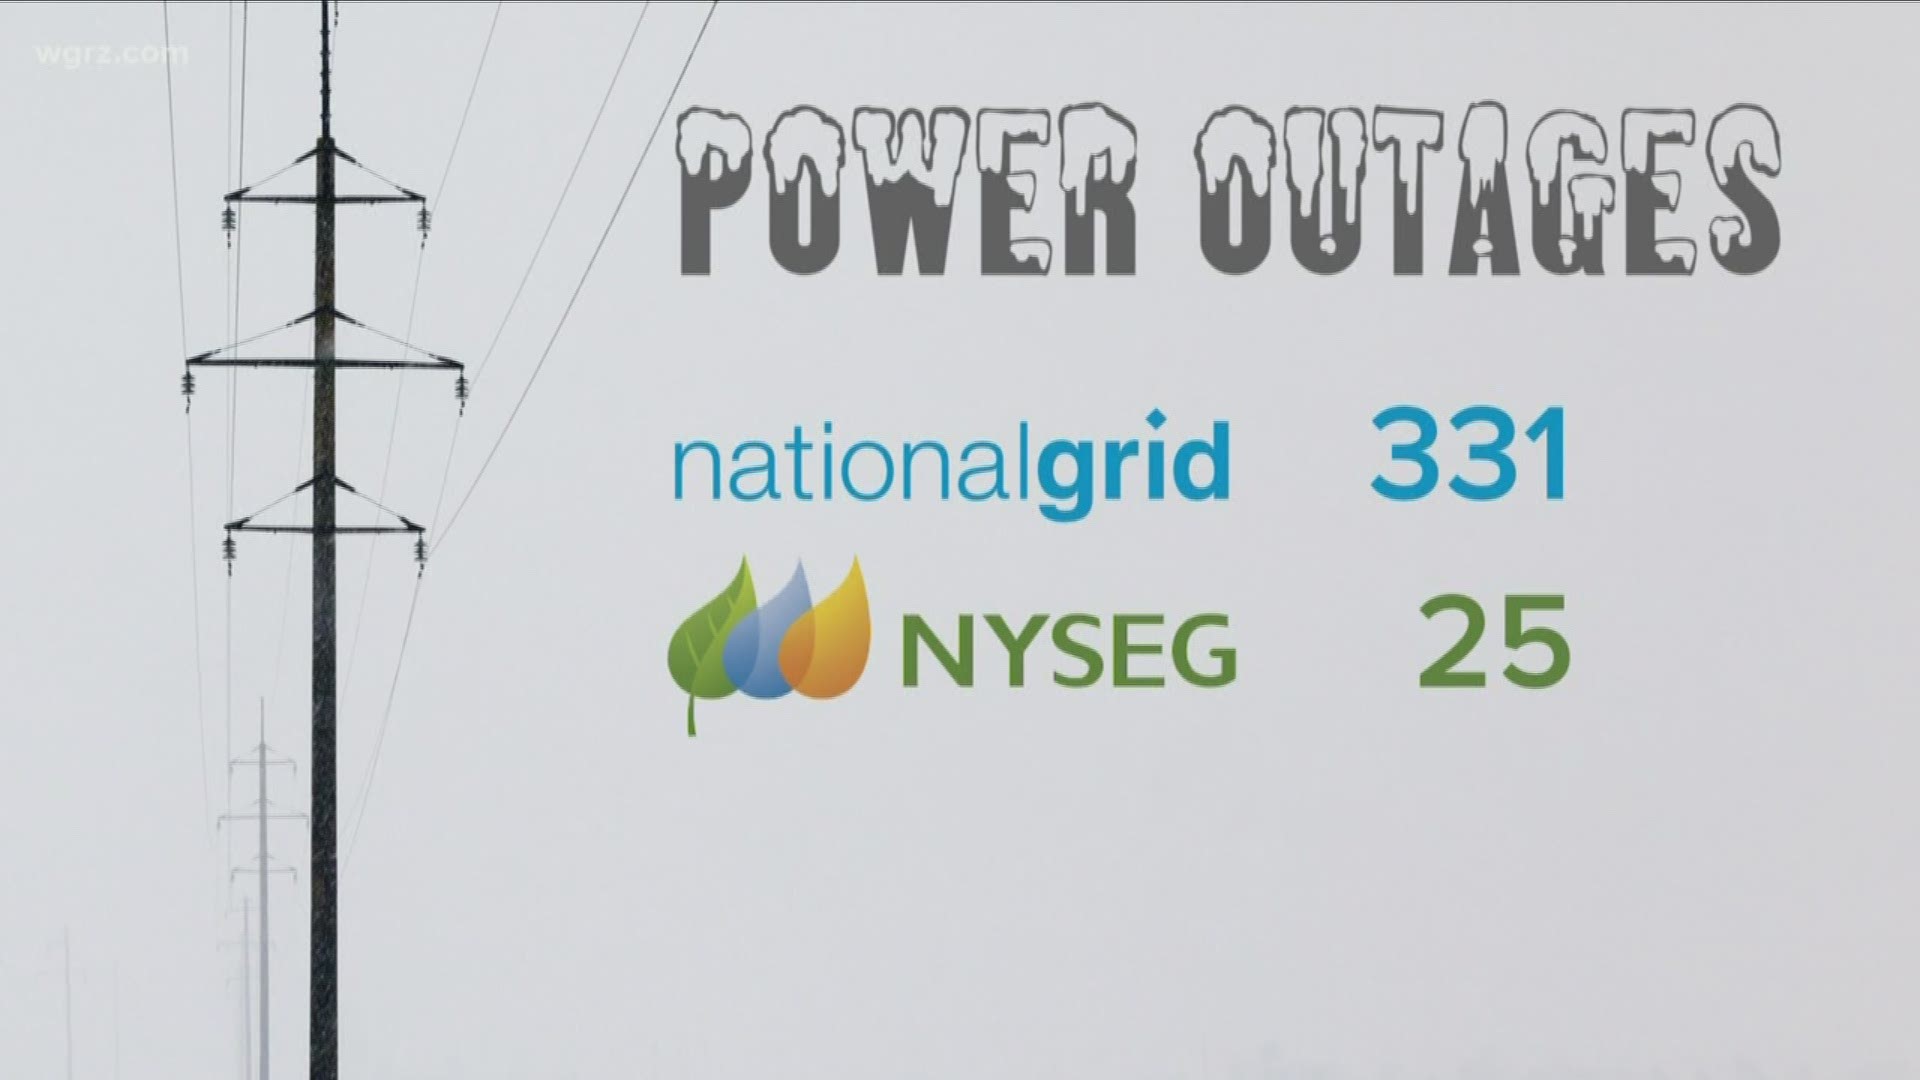 Only a couple dozen outages for NYSEG, all in Chautauqua County and just a few hundred National Grid customers are in the dark. They are expected to be back online s